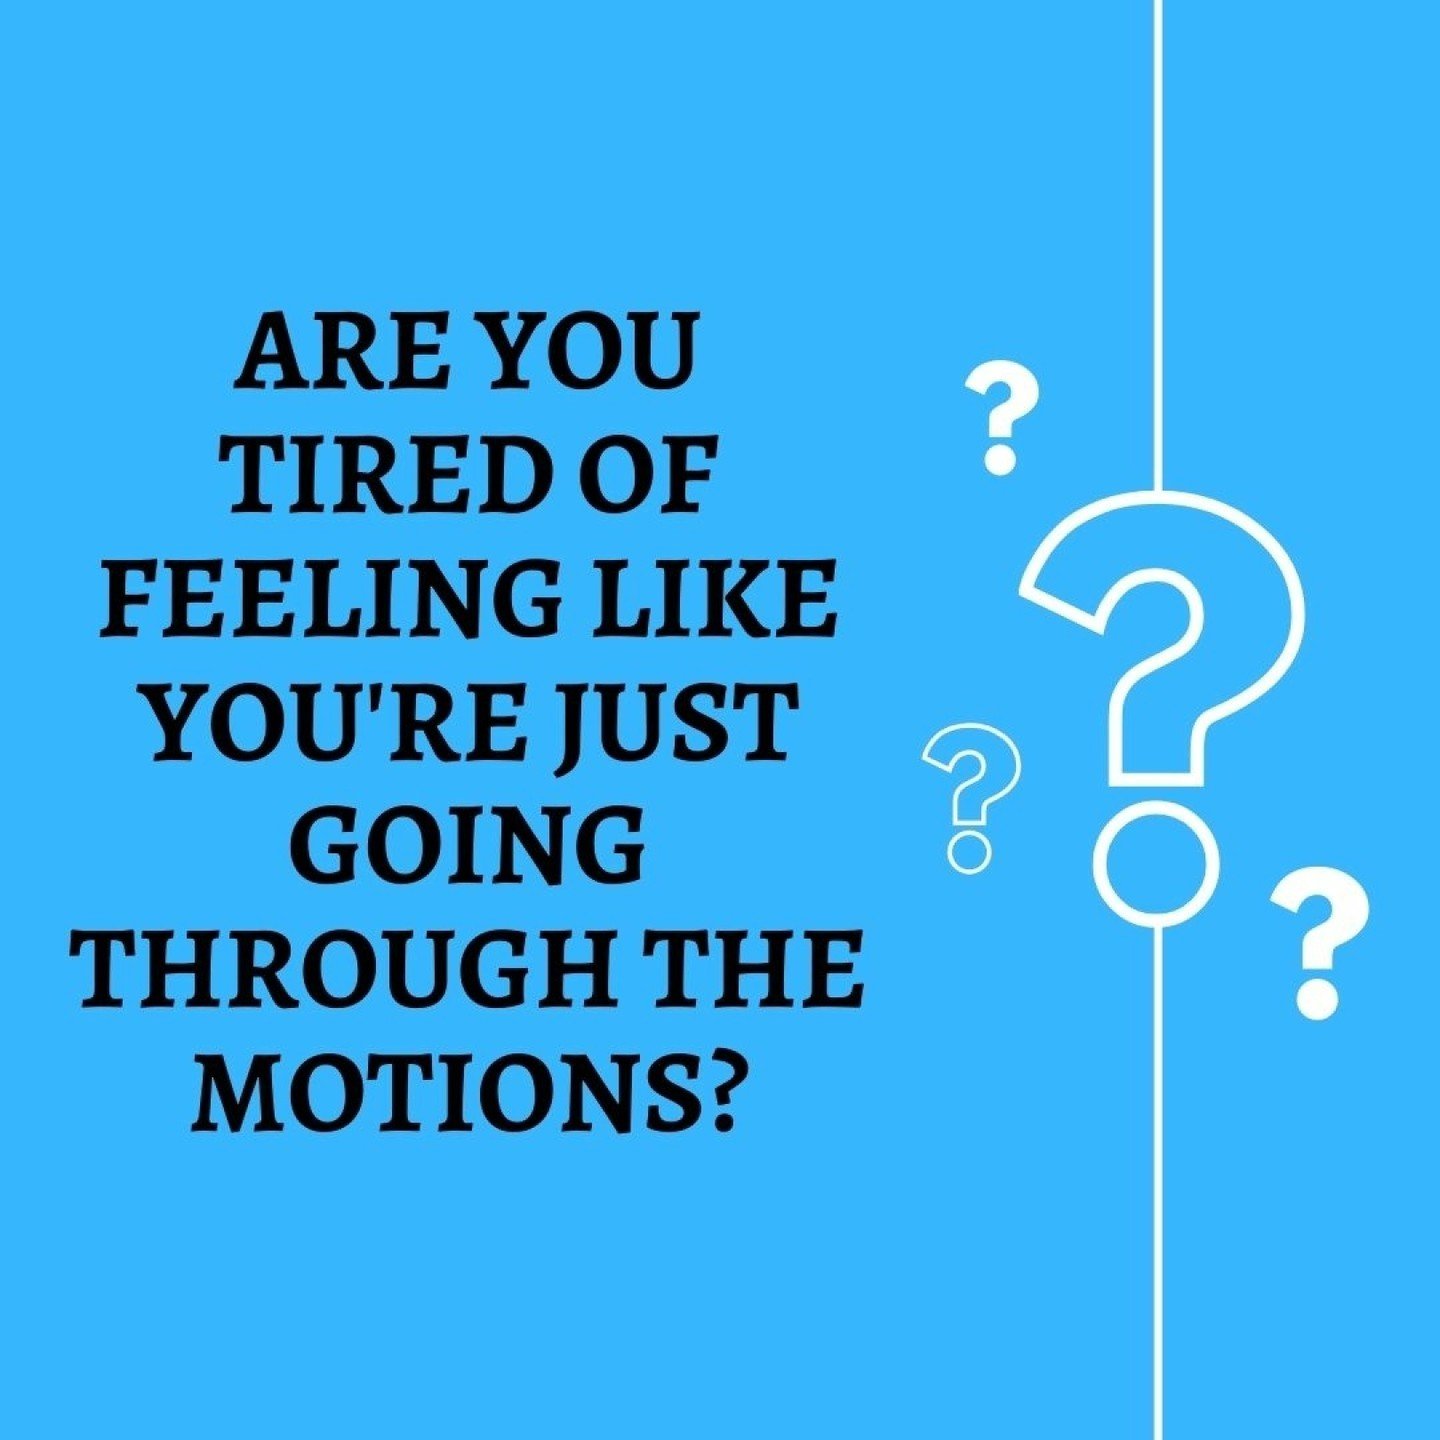 Are you tired of feeling like you're just going through the motions? 😩

If settling for &quot;meh&quot; has become your default, it's time to shake things up and try something new.

Whether it's a new hobby, exercise routine, or self-care practice, 